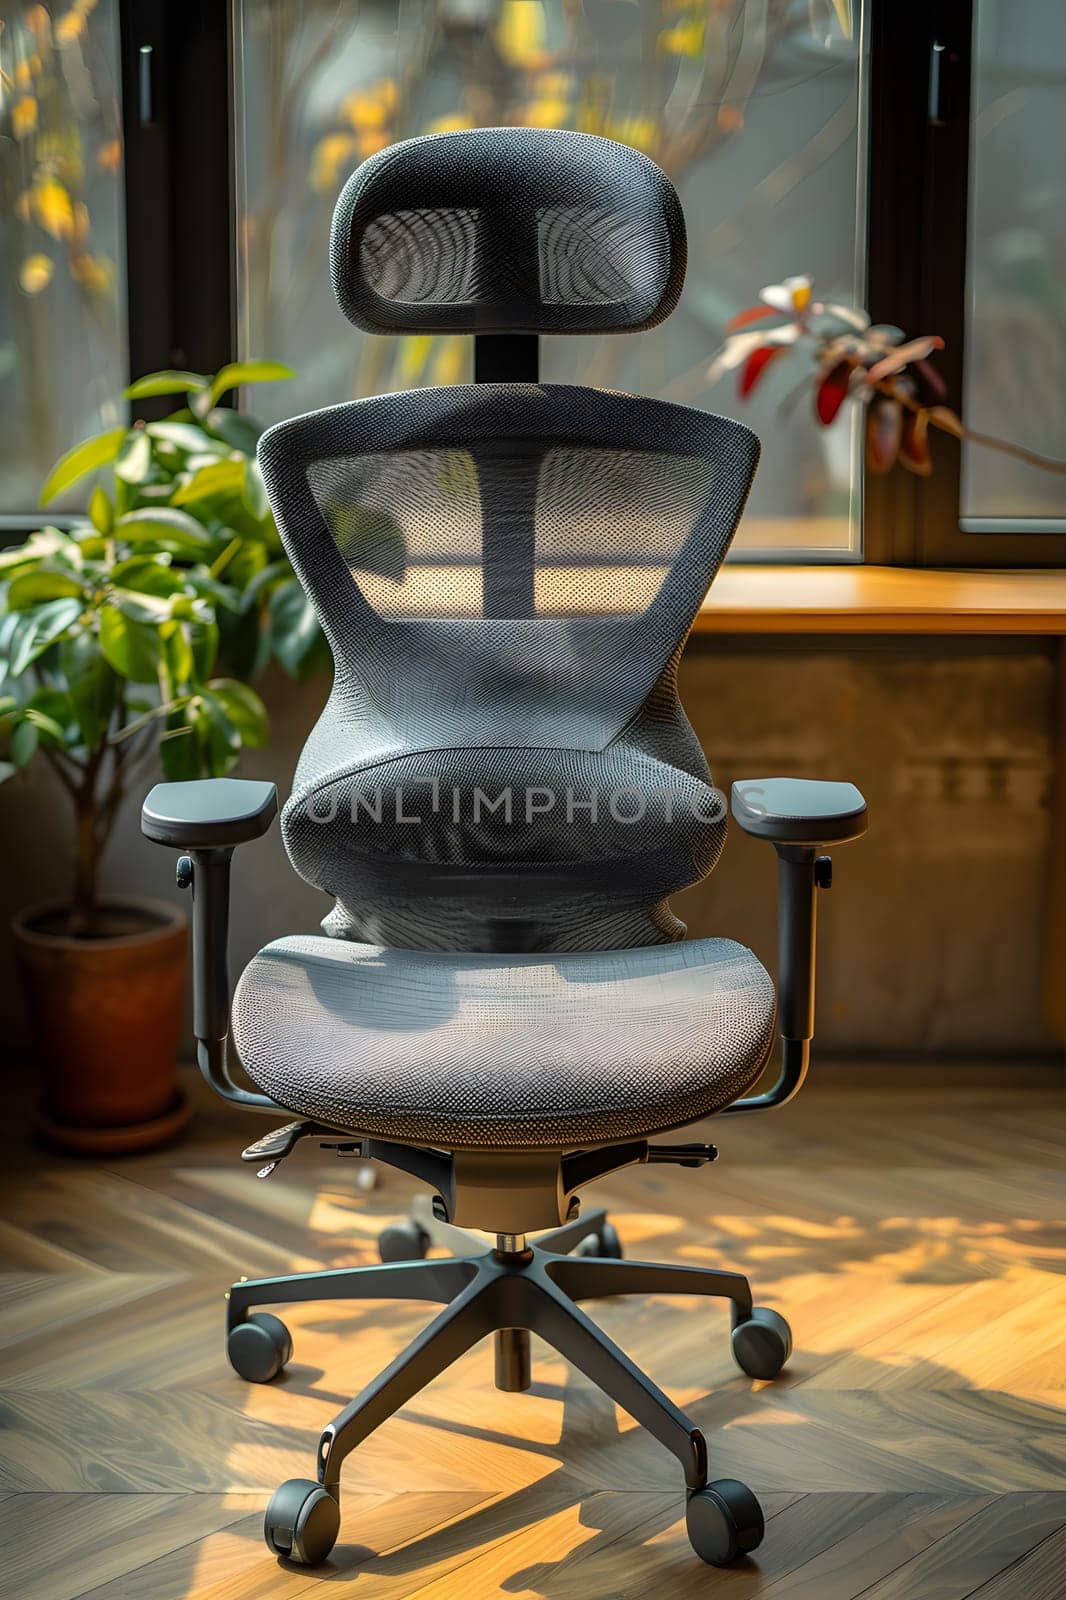 An office chair is placed in front of a window in a room, with a flowerpot containing a houseplant beside it. The chair is black, matching the tint of the window glass